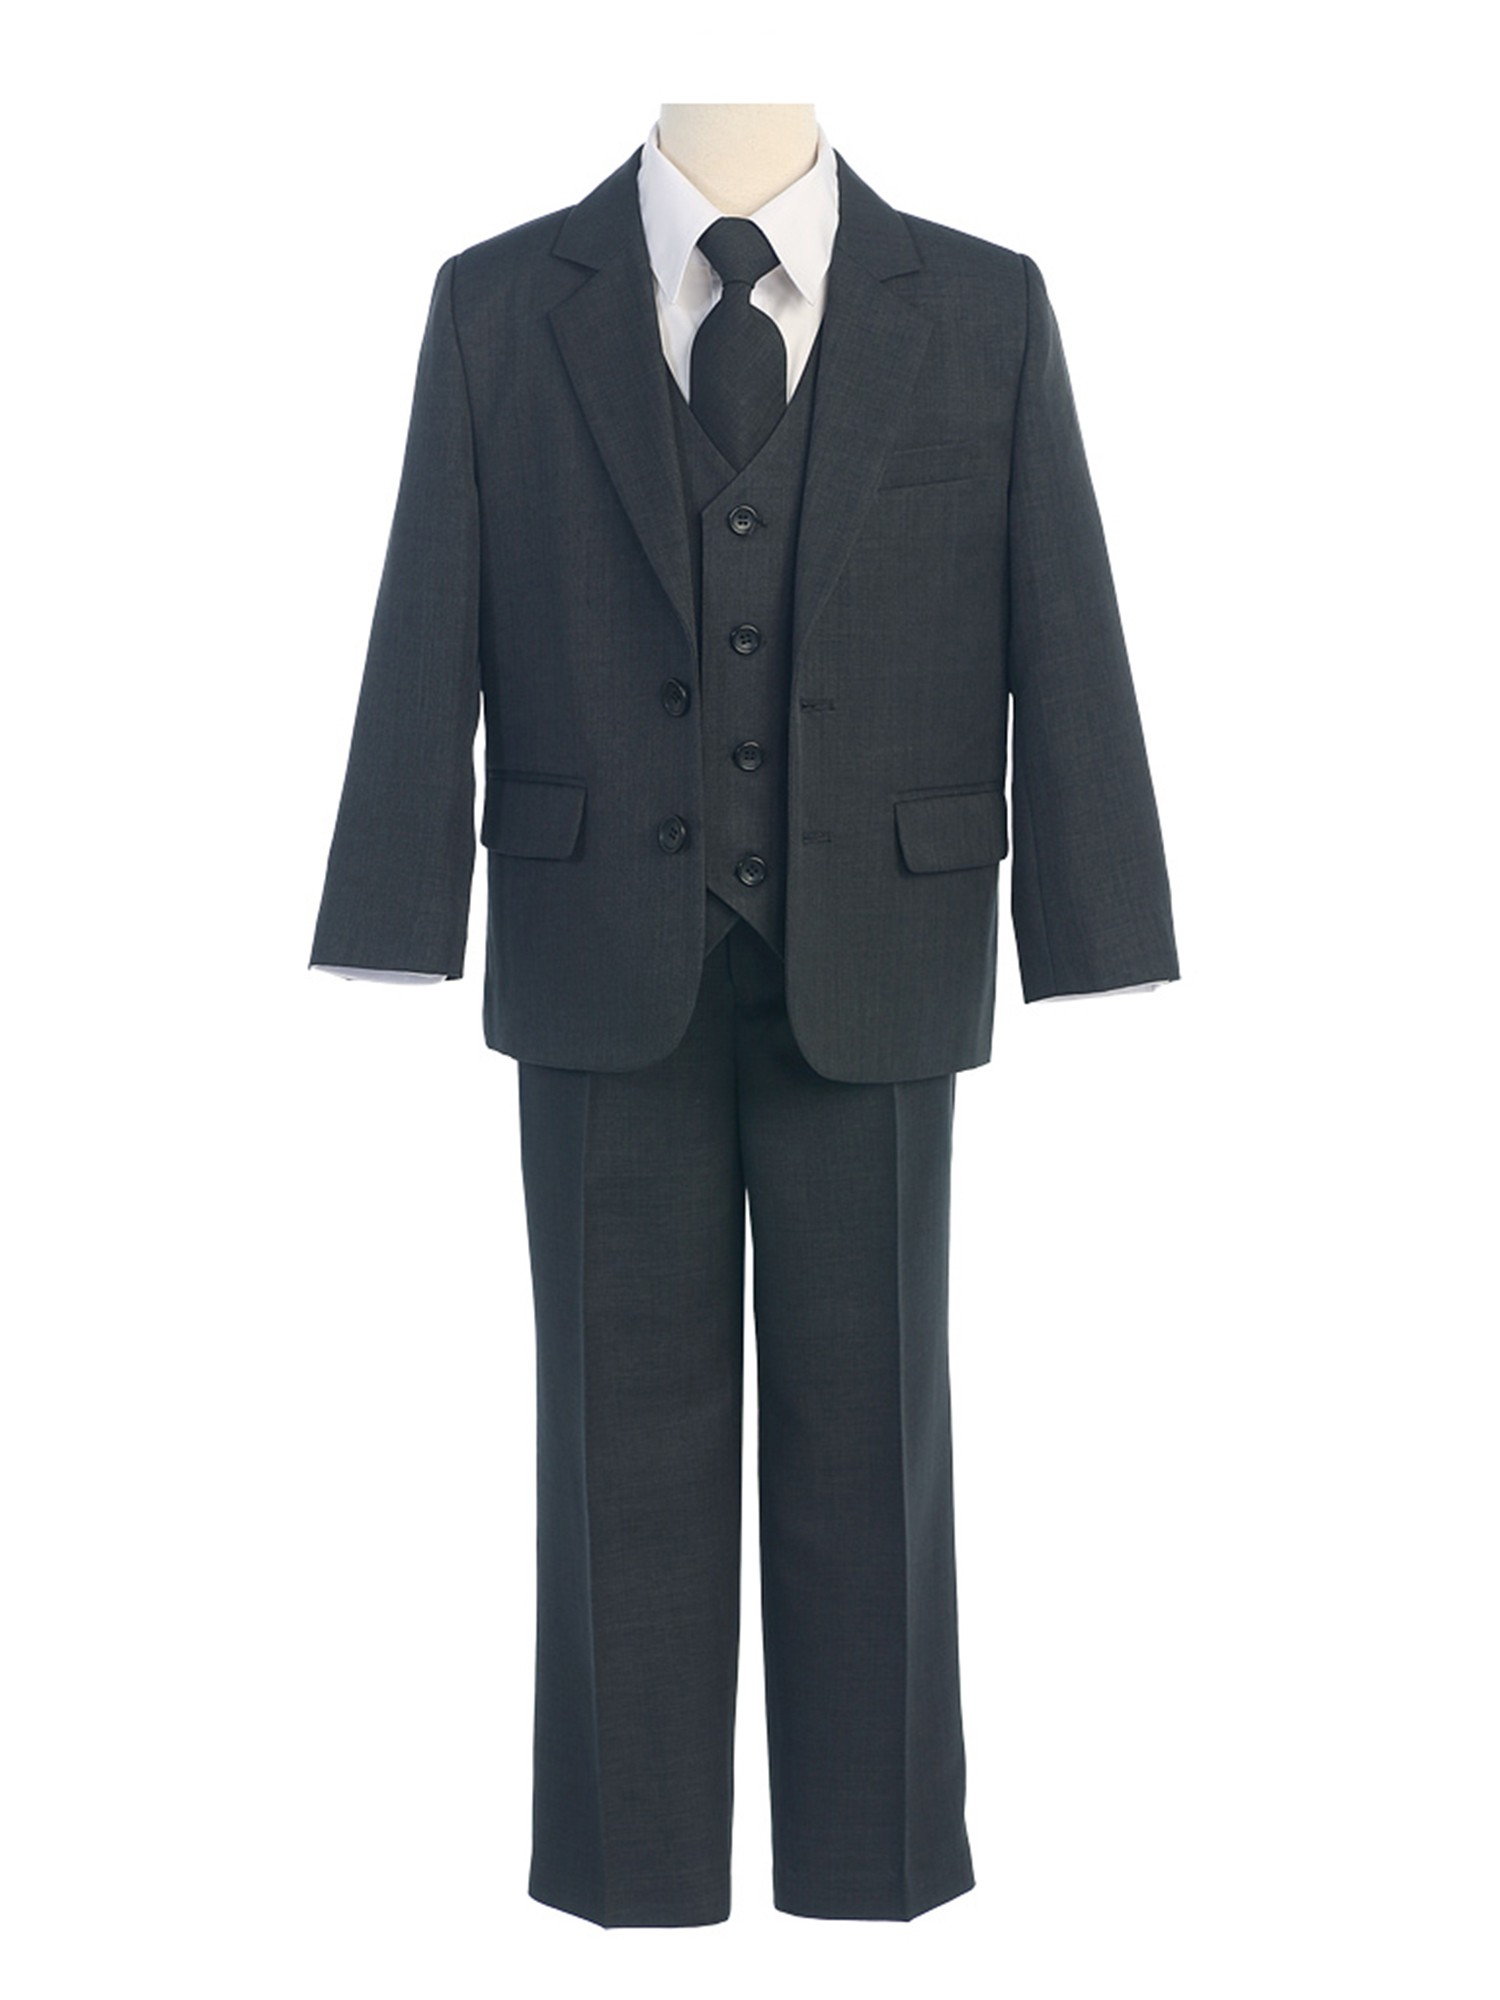 COLE Boys Suit with Shirt and Vest (5-Piece) - Charcoal Grey - Size 18